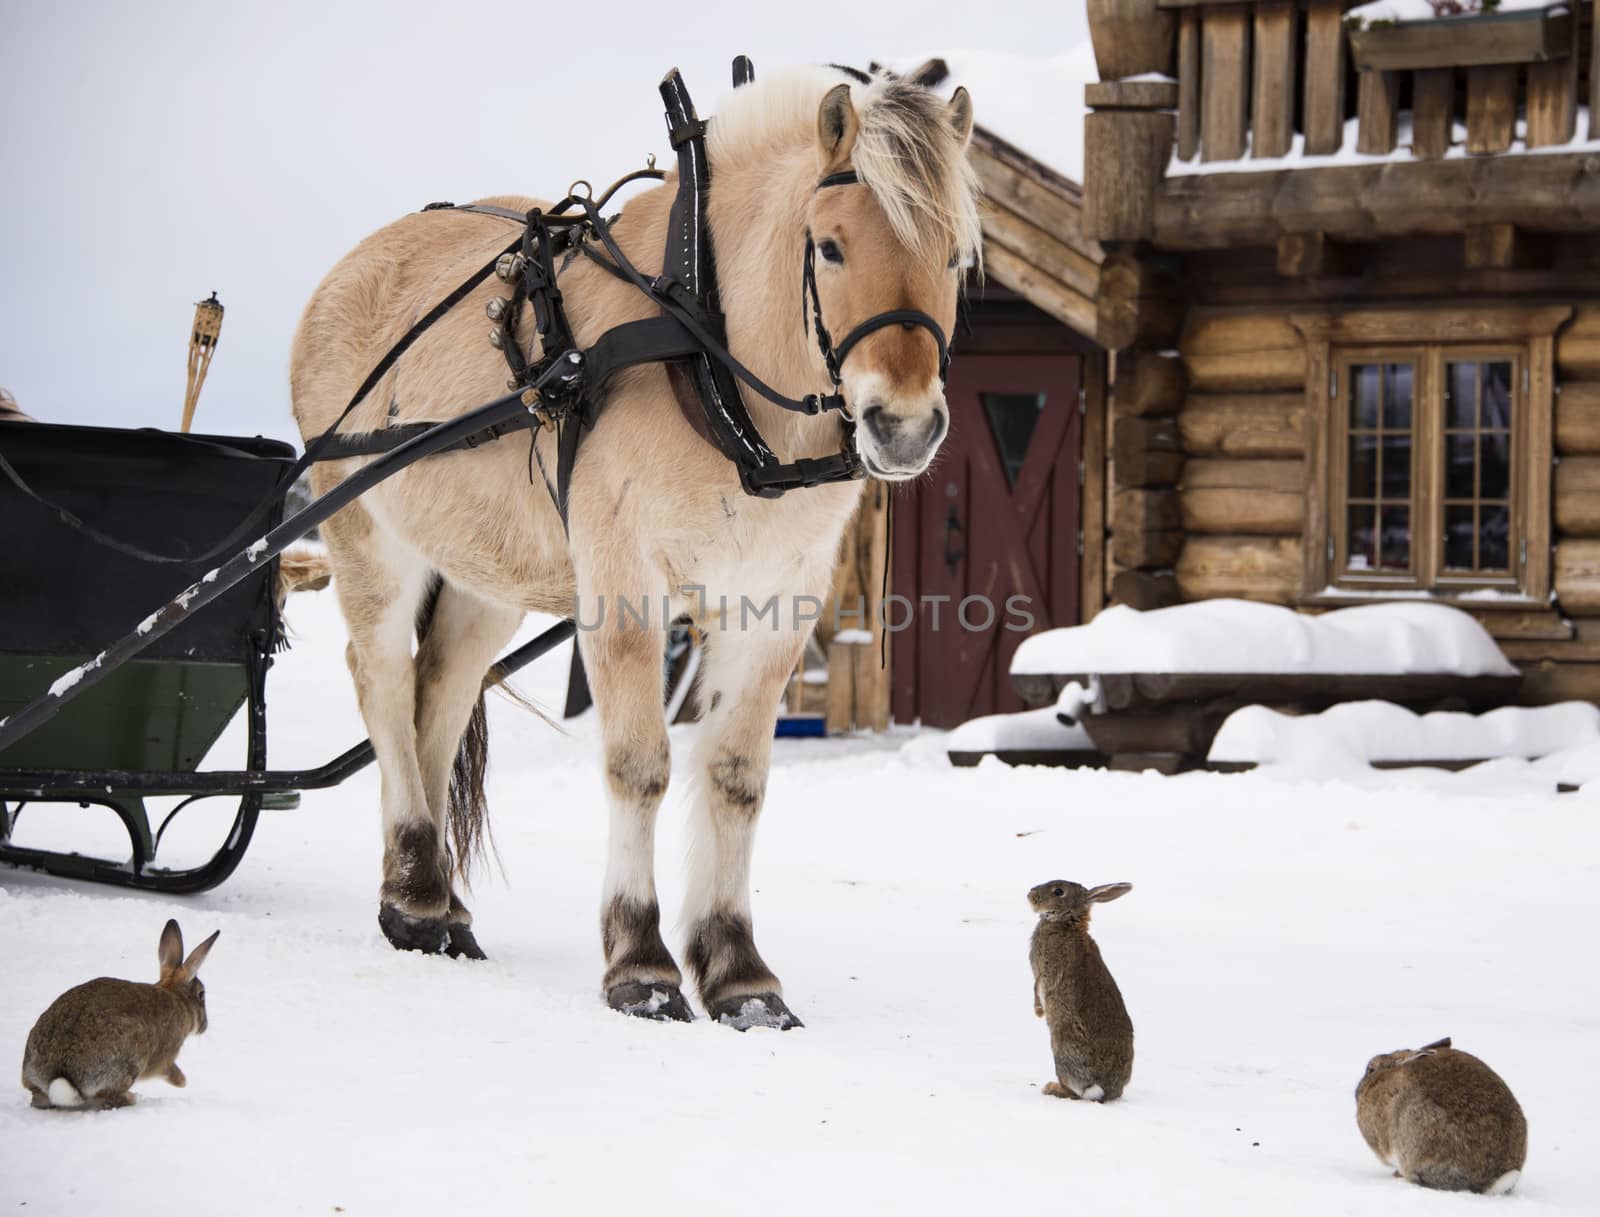 Horse and rabbits by GryT